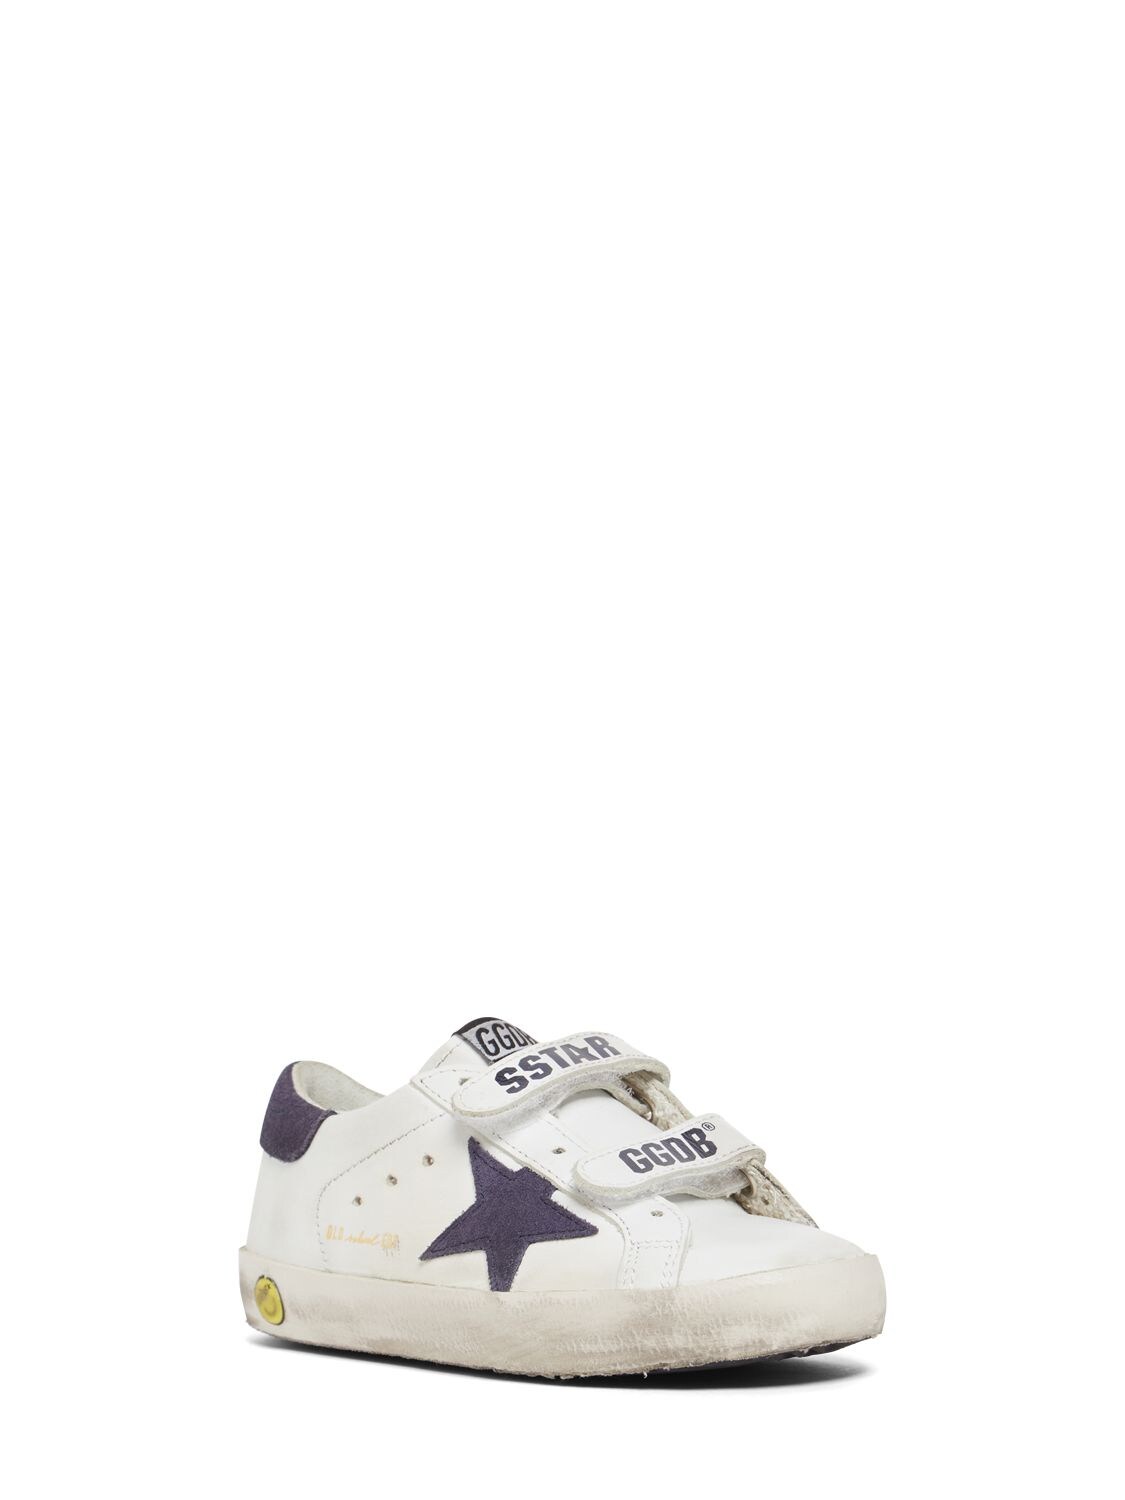 Shop Golden Goose Old School Leather Strap Sneakers In White